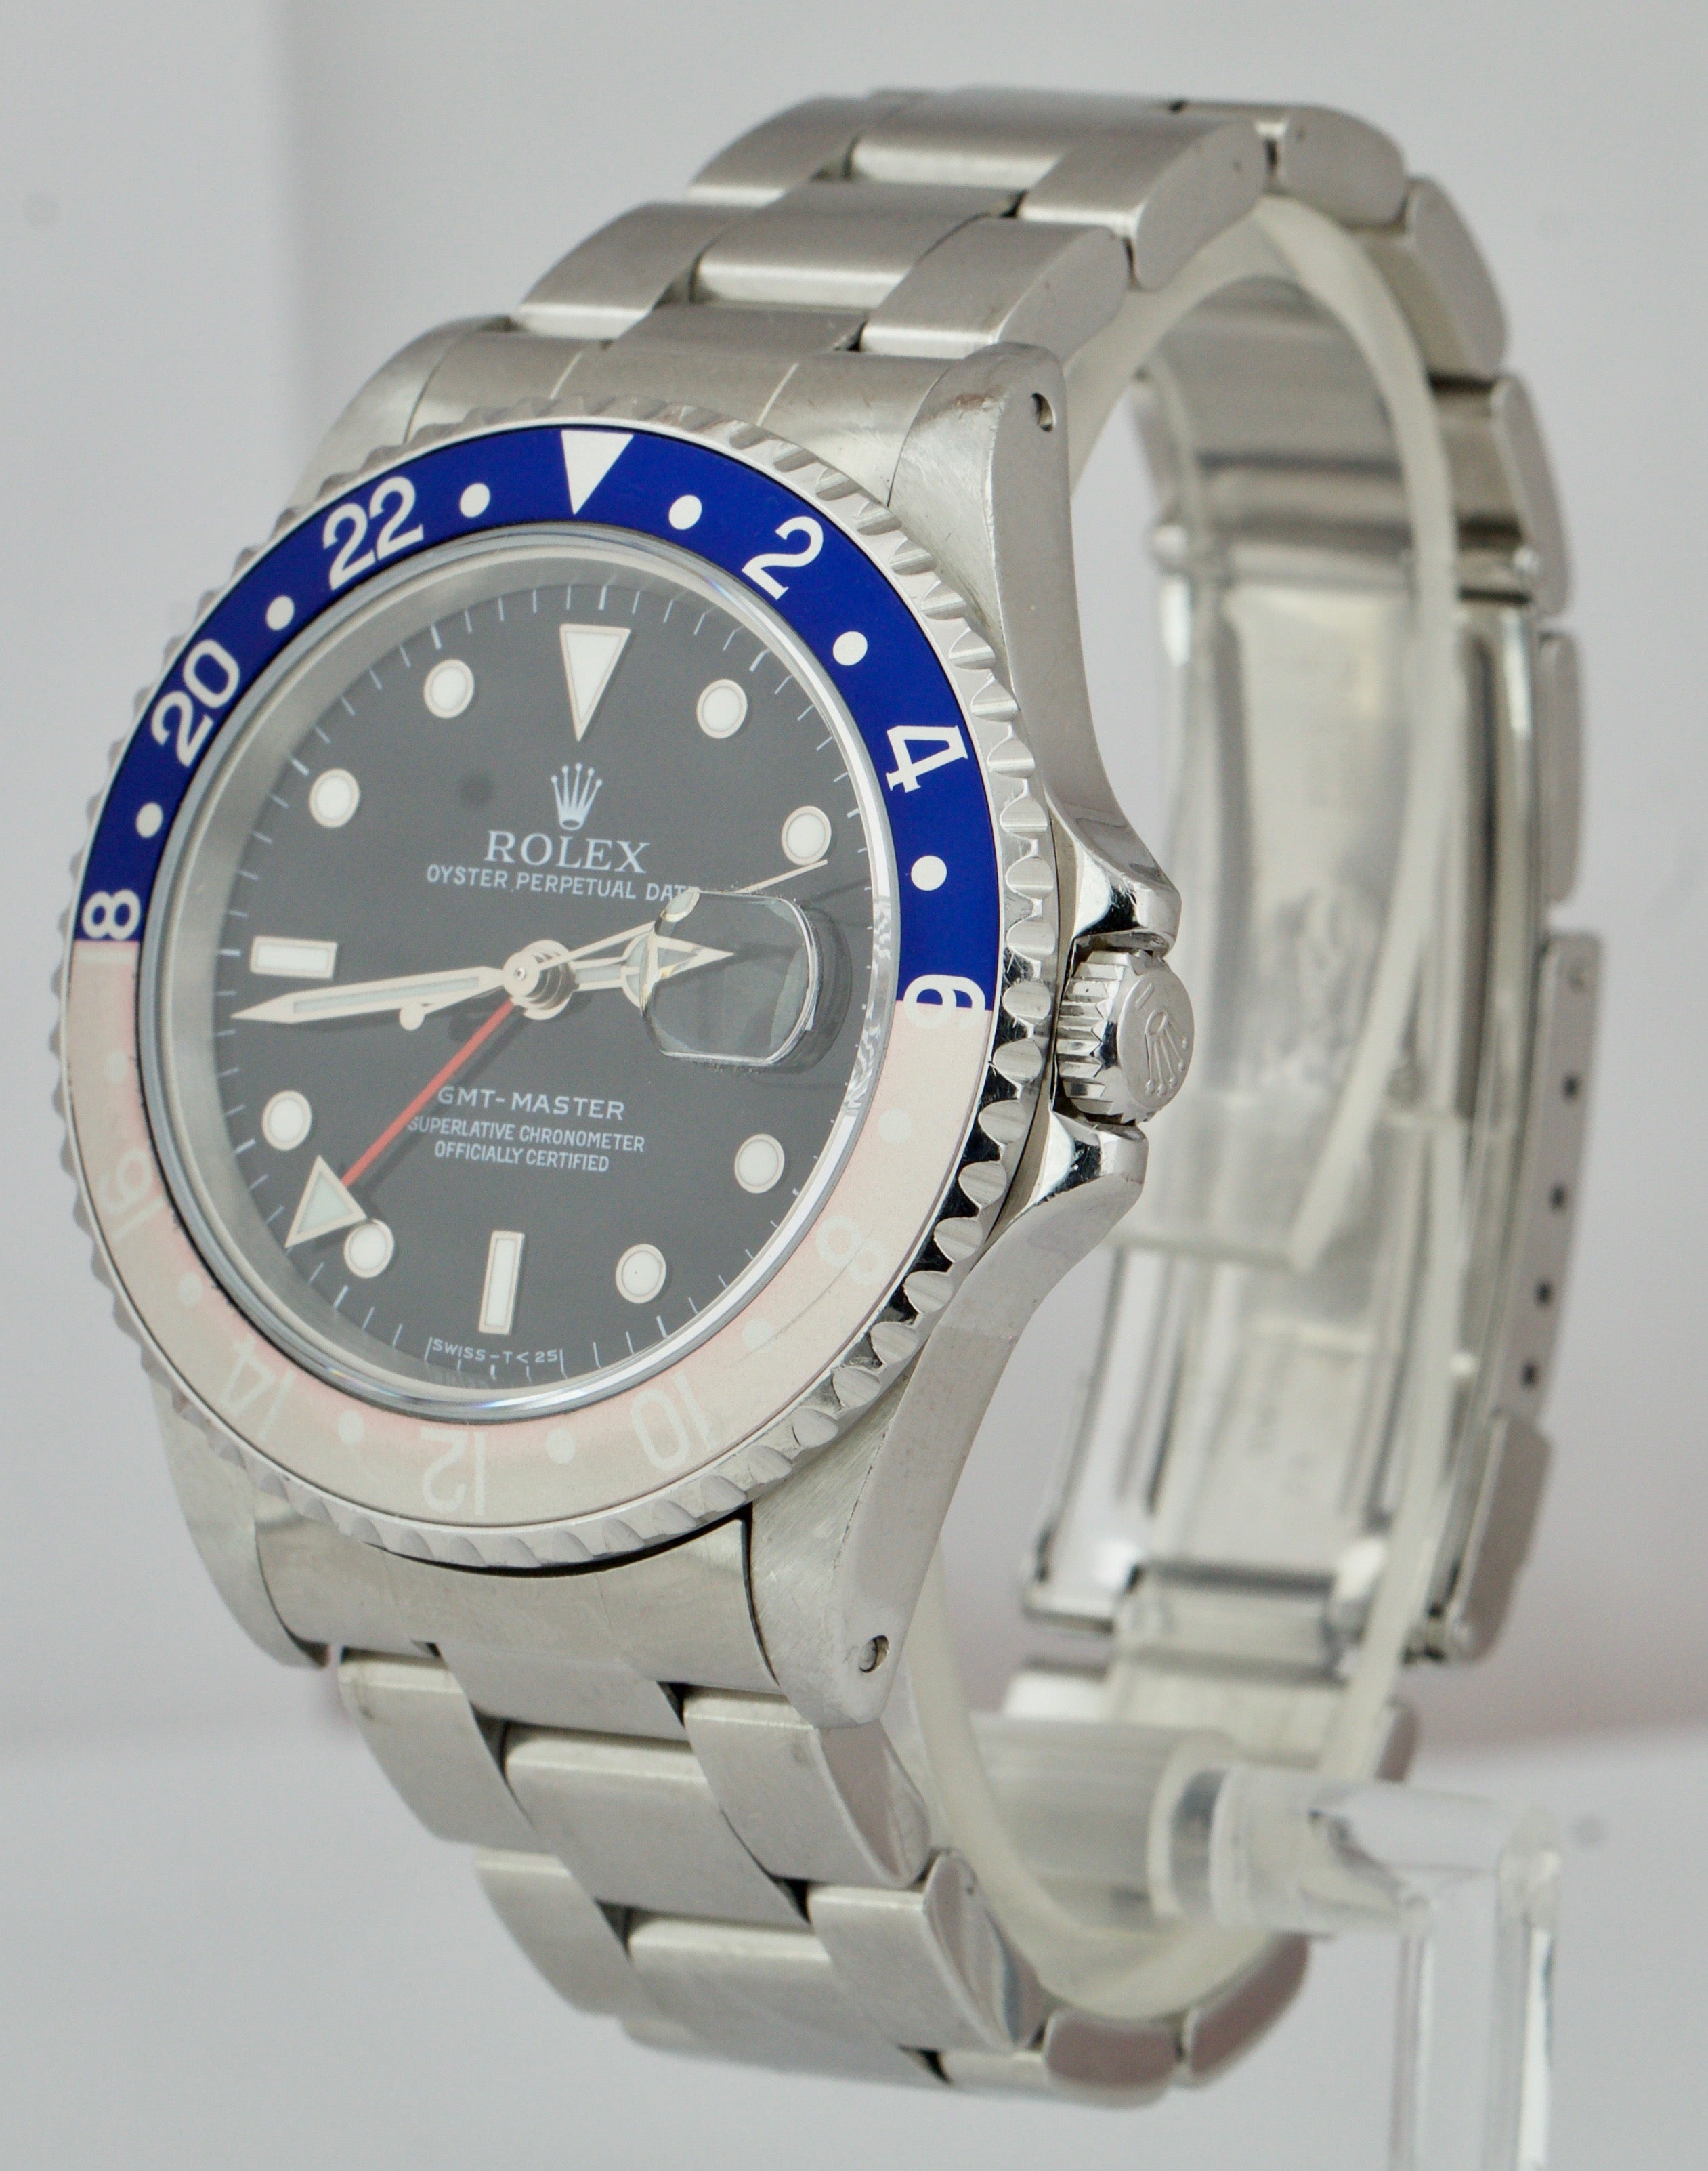 1998 Rolex GMT-Master Pepsi Faded Blue Red Stainless 16700 40mm Date Watch 16710